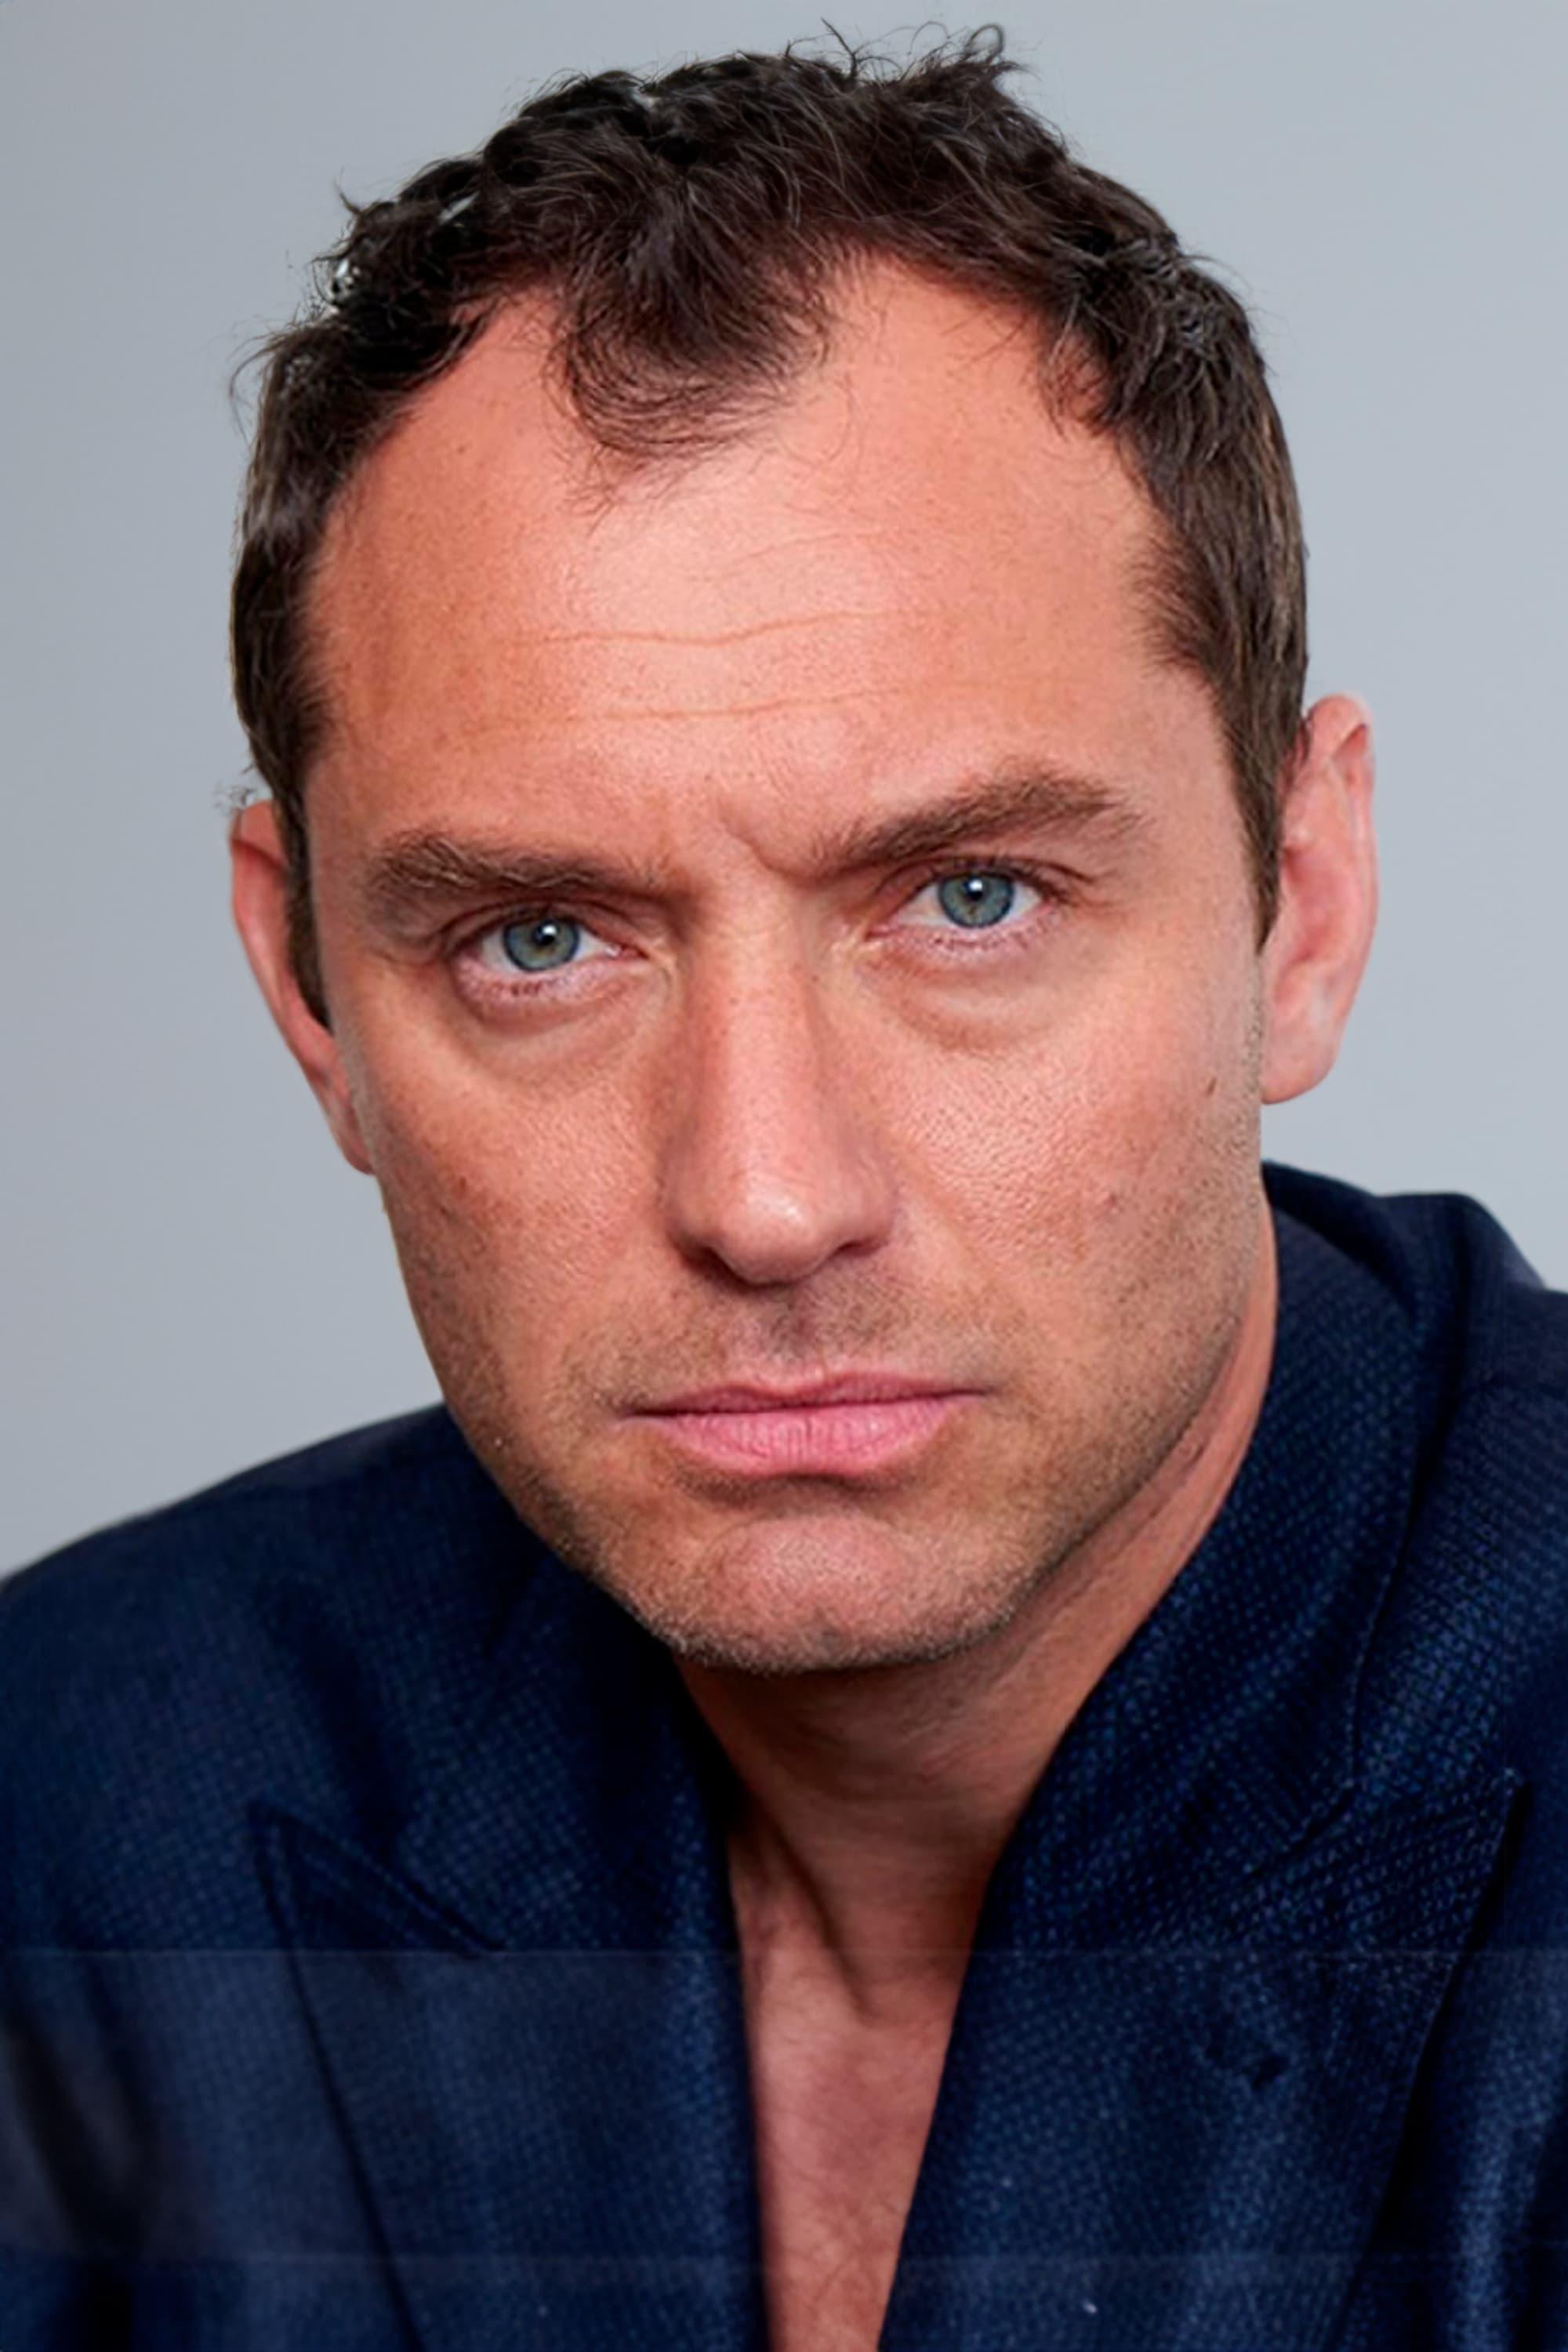 Jude Law | Pitch (voice)